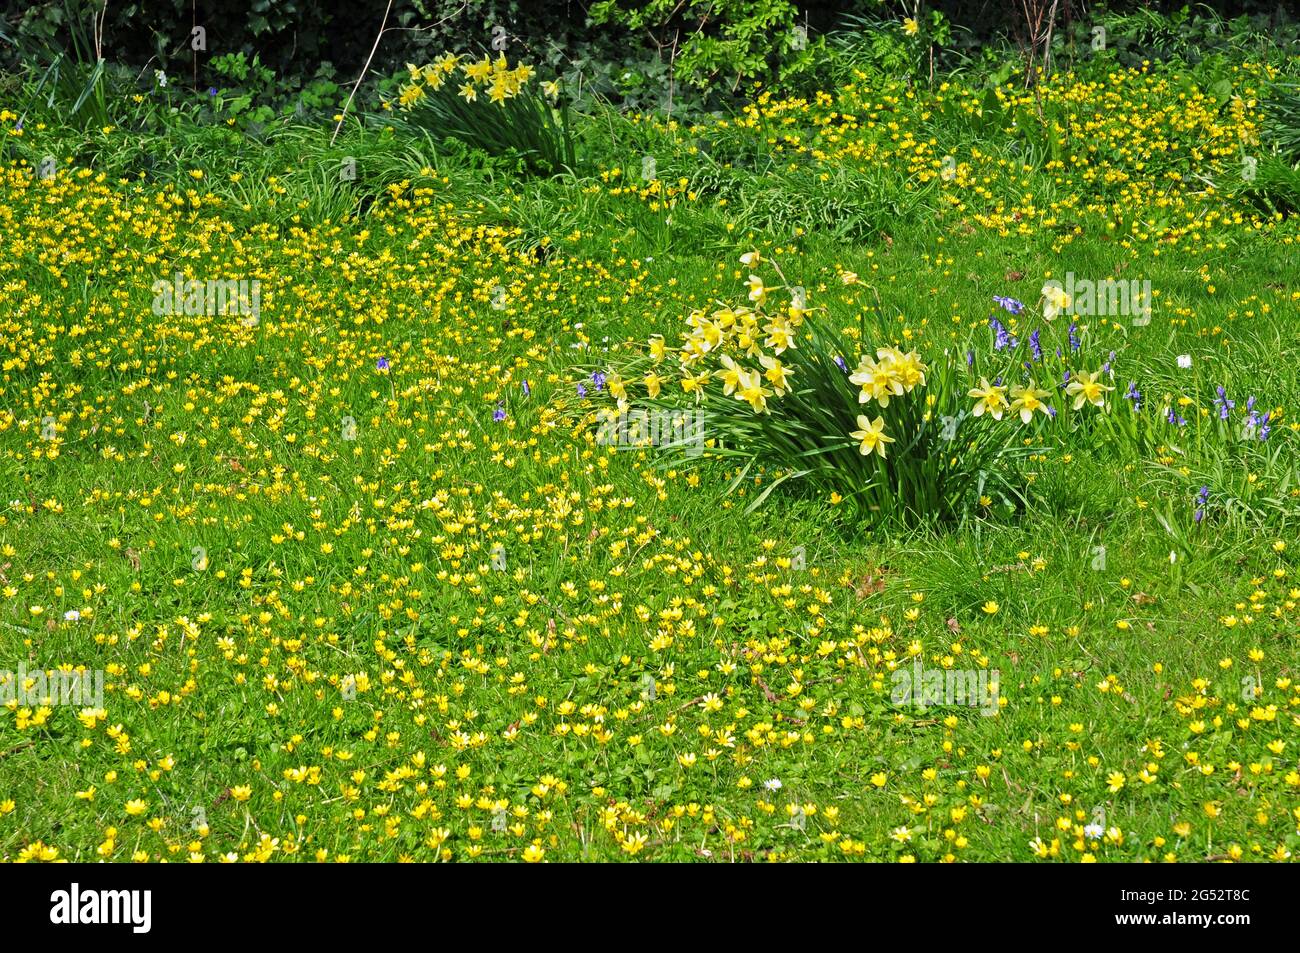 Daffodils, Bluebells and Celandines growing in grass. Stock Photo